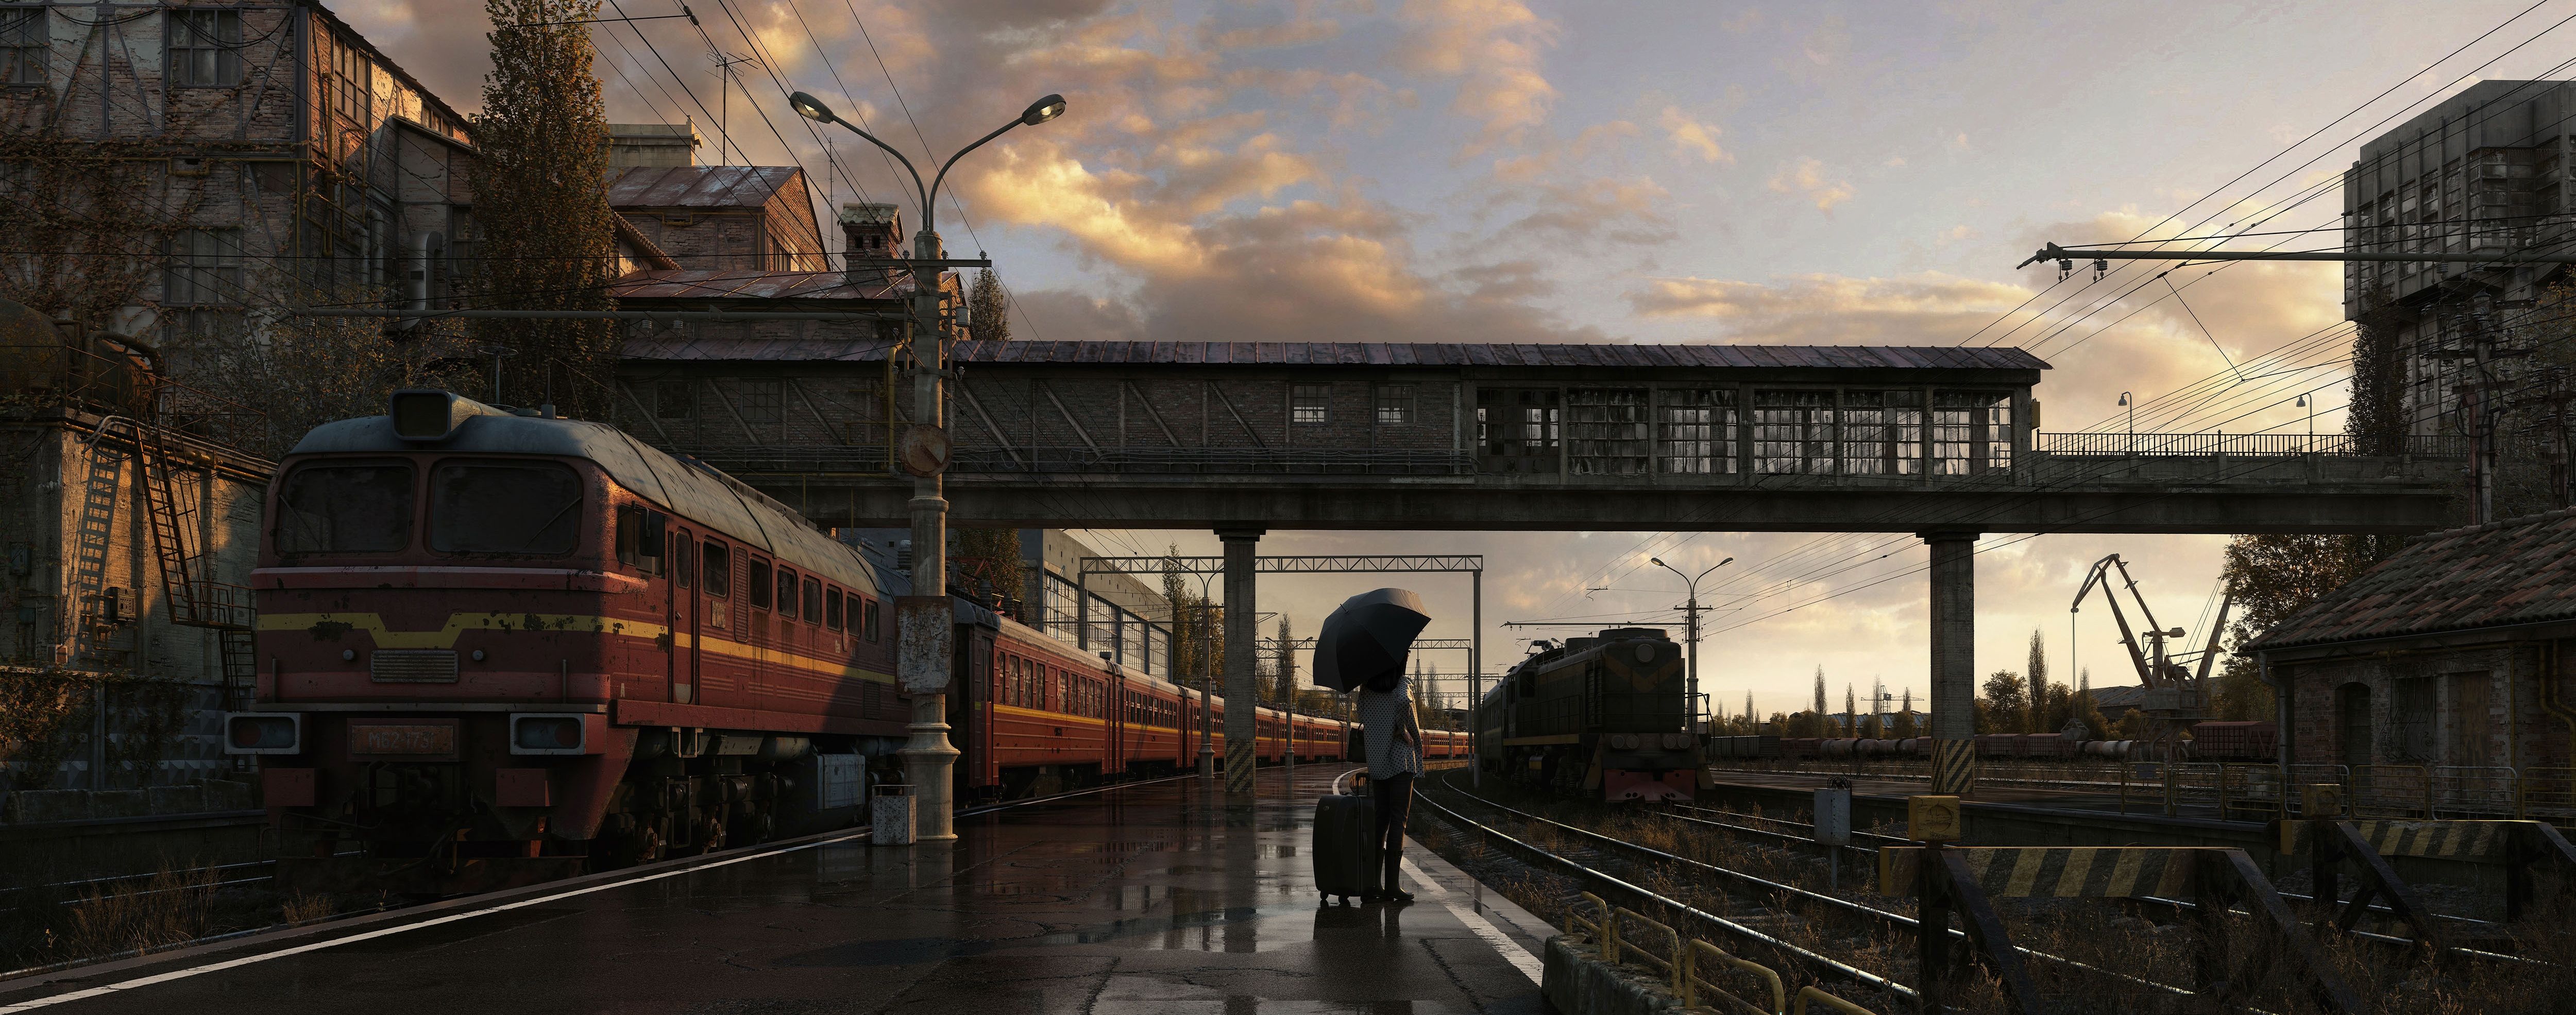 russian train stations. Home / Photographs